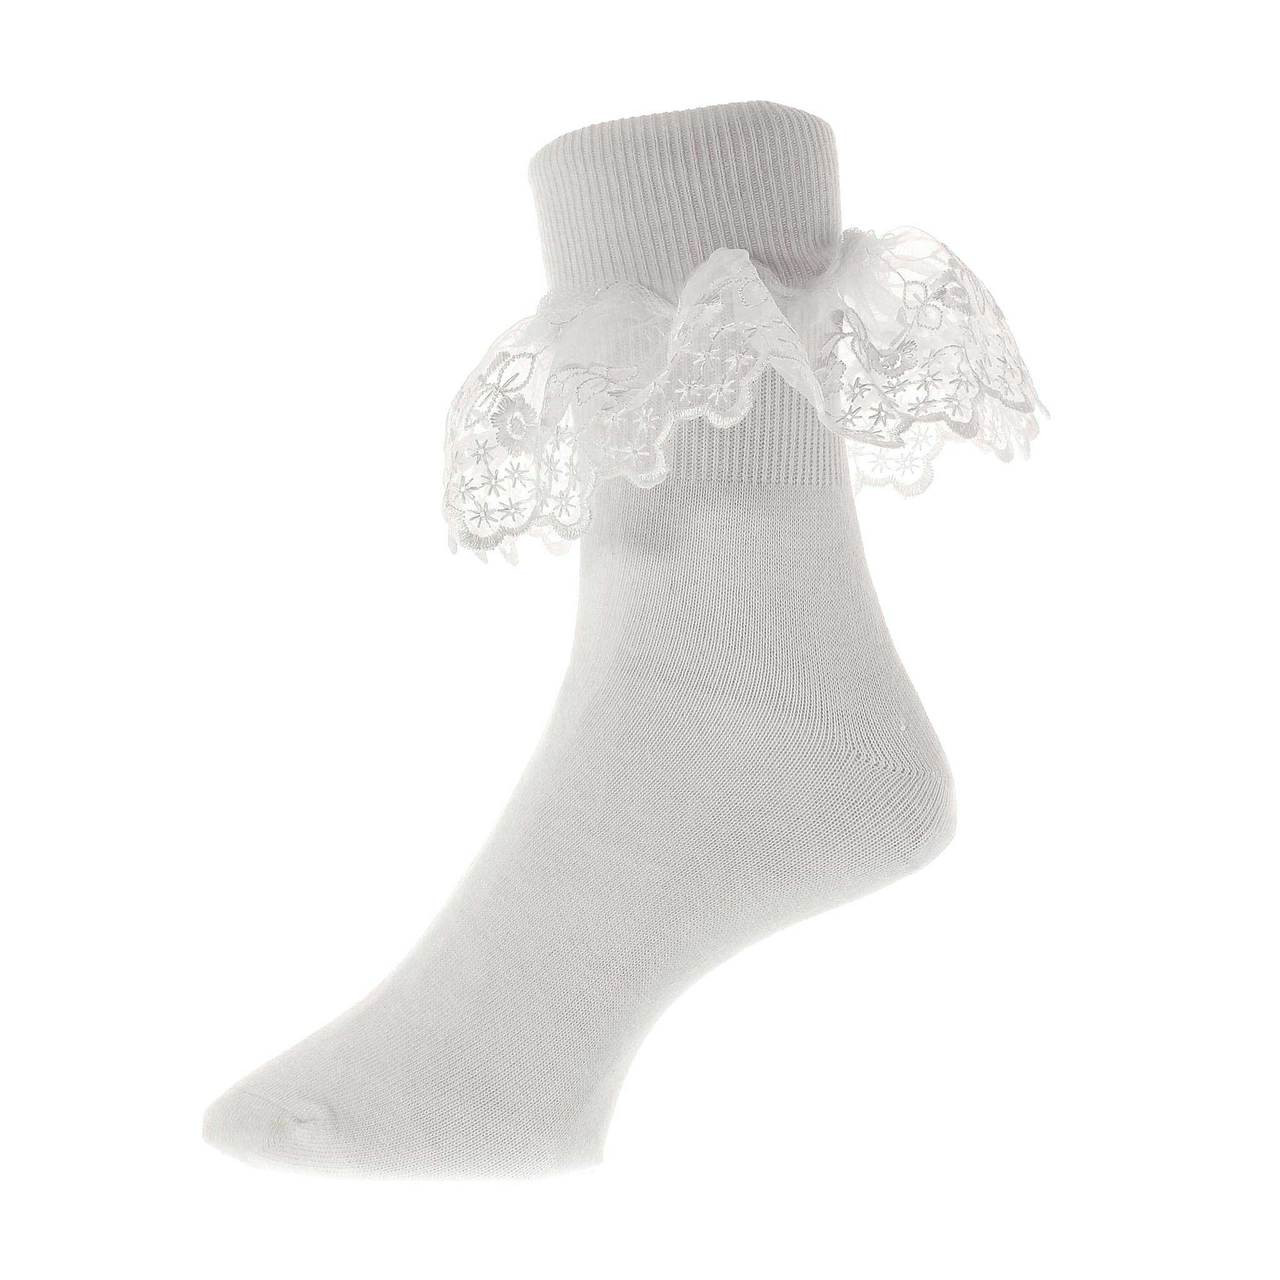 Divine White Lace Cotton Bobby Socks for Ladies Set of 2 Pairs